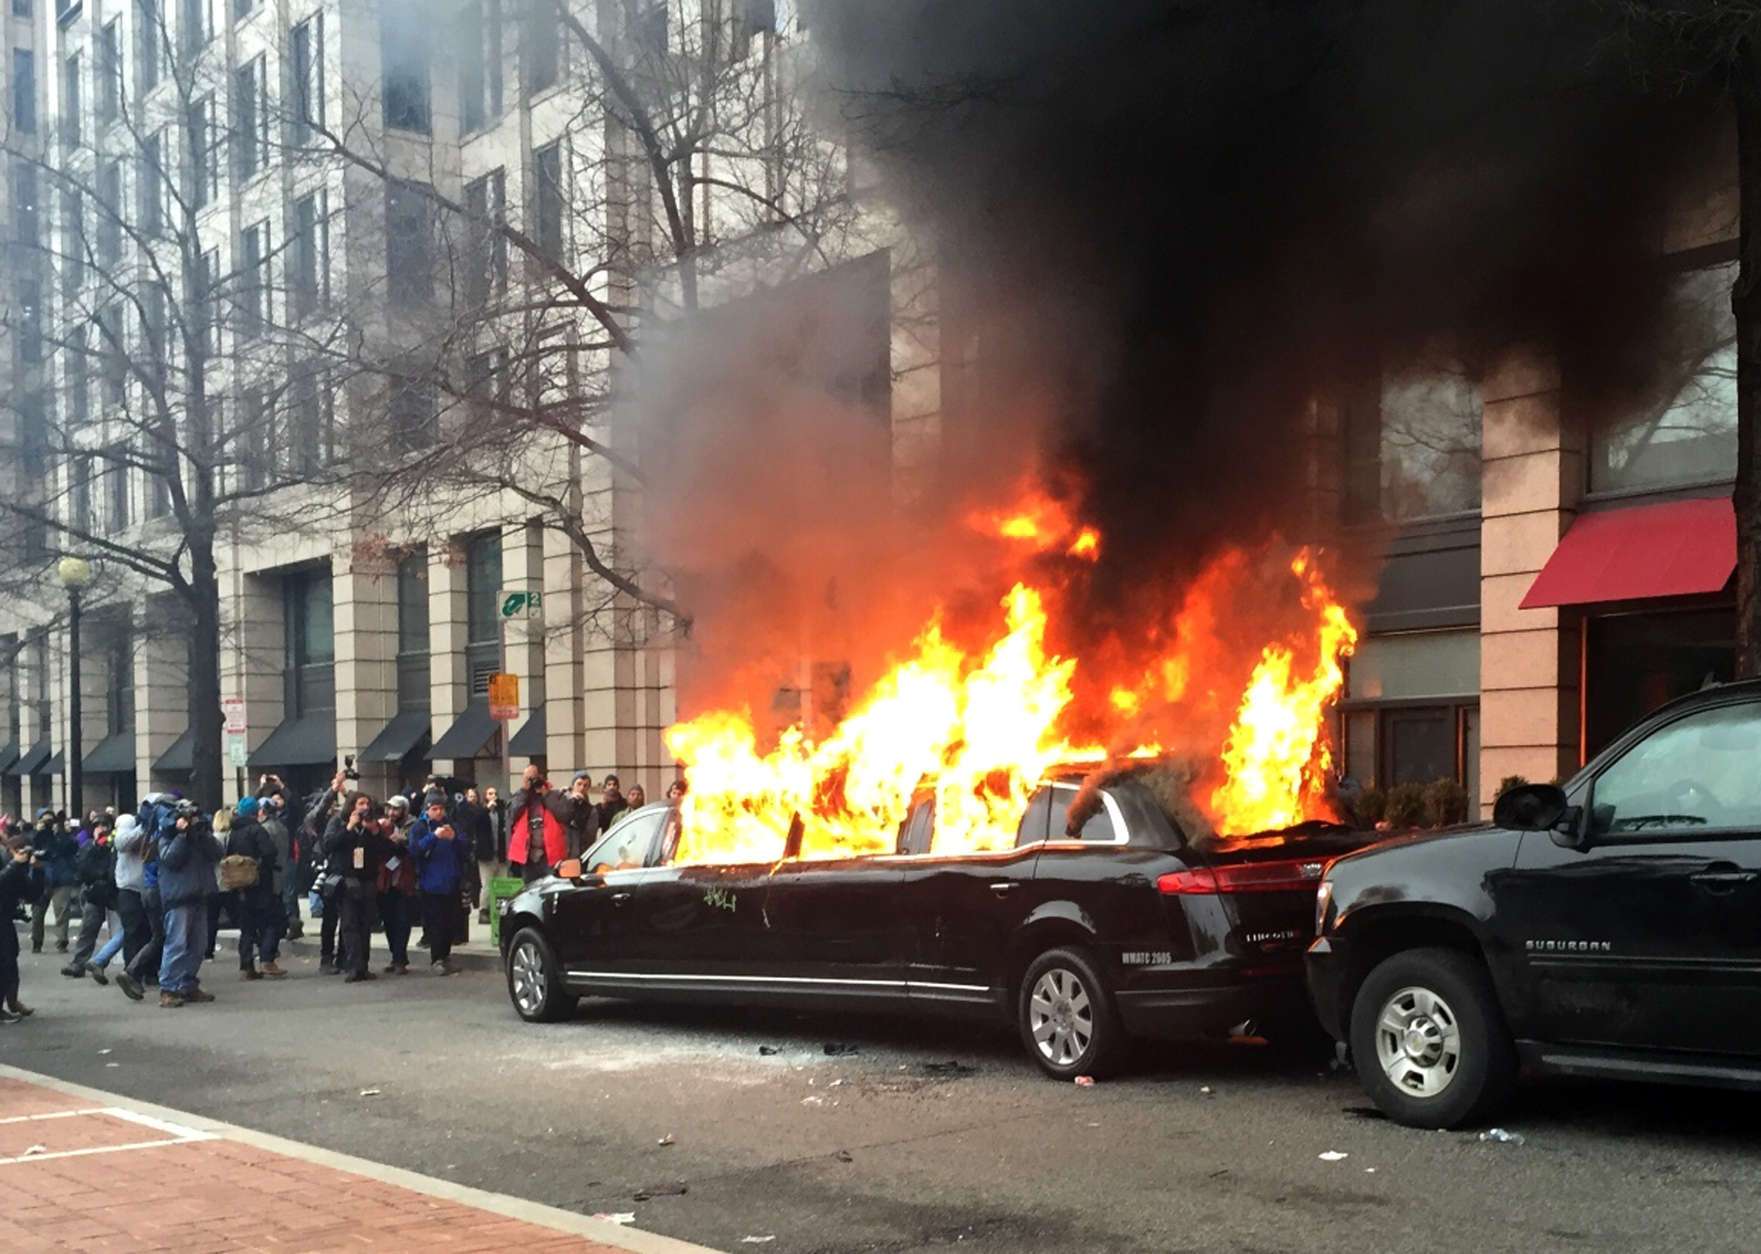 Protesters set a parked limousine on fire in downtown Washington, Friday, Jan. 20, 2017, during the inauguration of President Donald Trump. 
(AP Photo/Juliet Linderman)